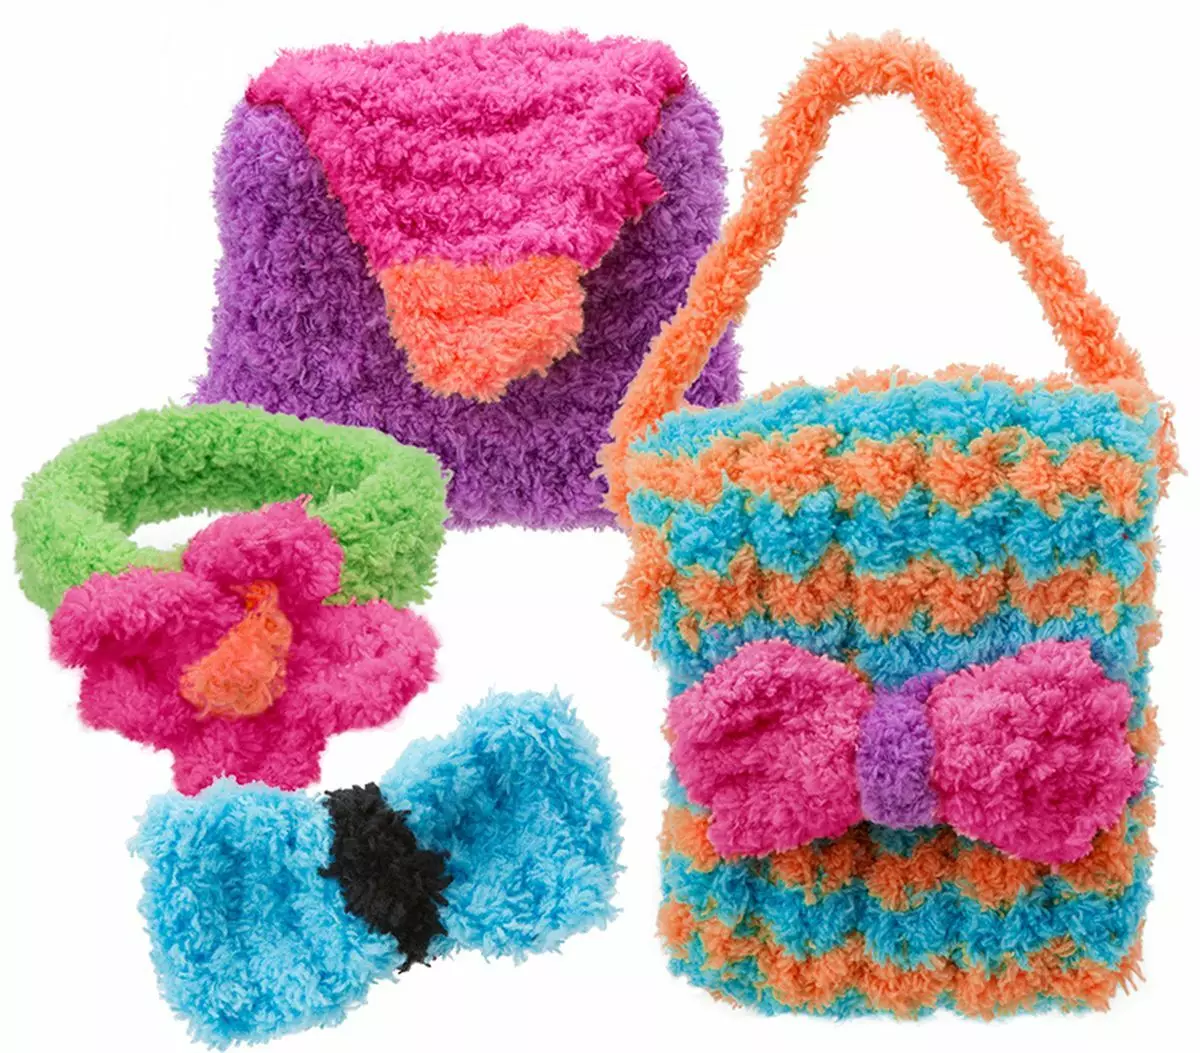 Knitting Sets: Children's Kits for Knitting Toys, Bags and Backpacks Crochet, Tools for Creativity and Gift Knitting Sets 24509_29